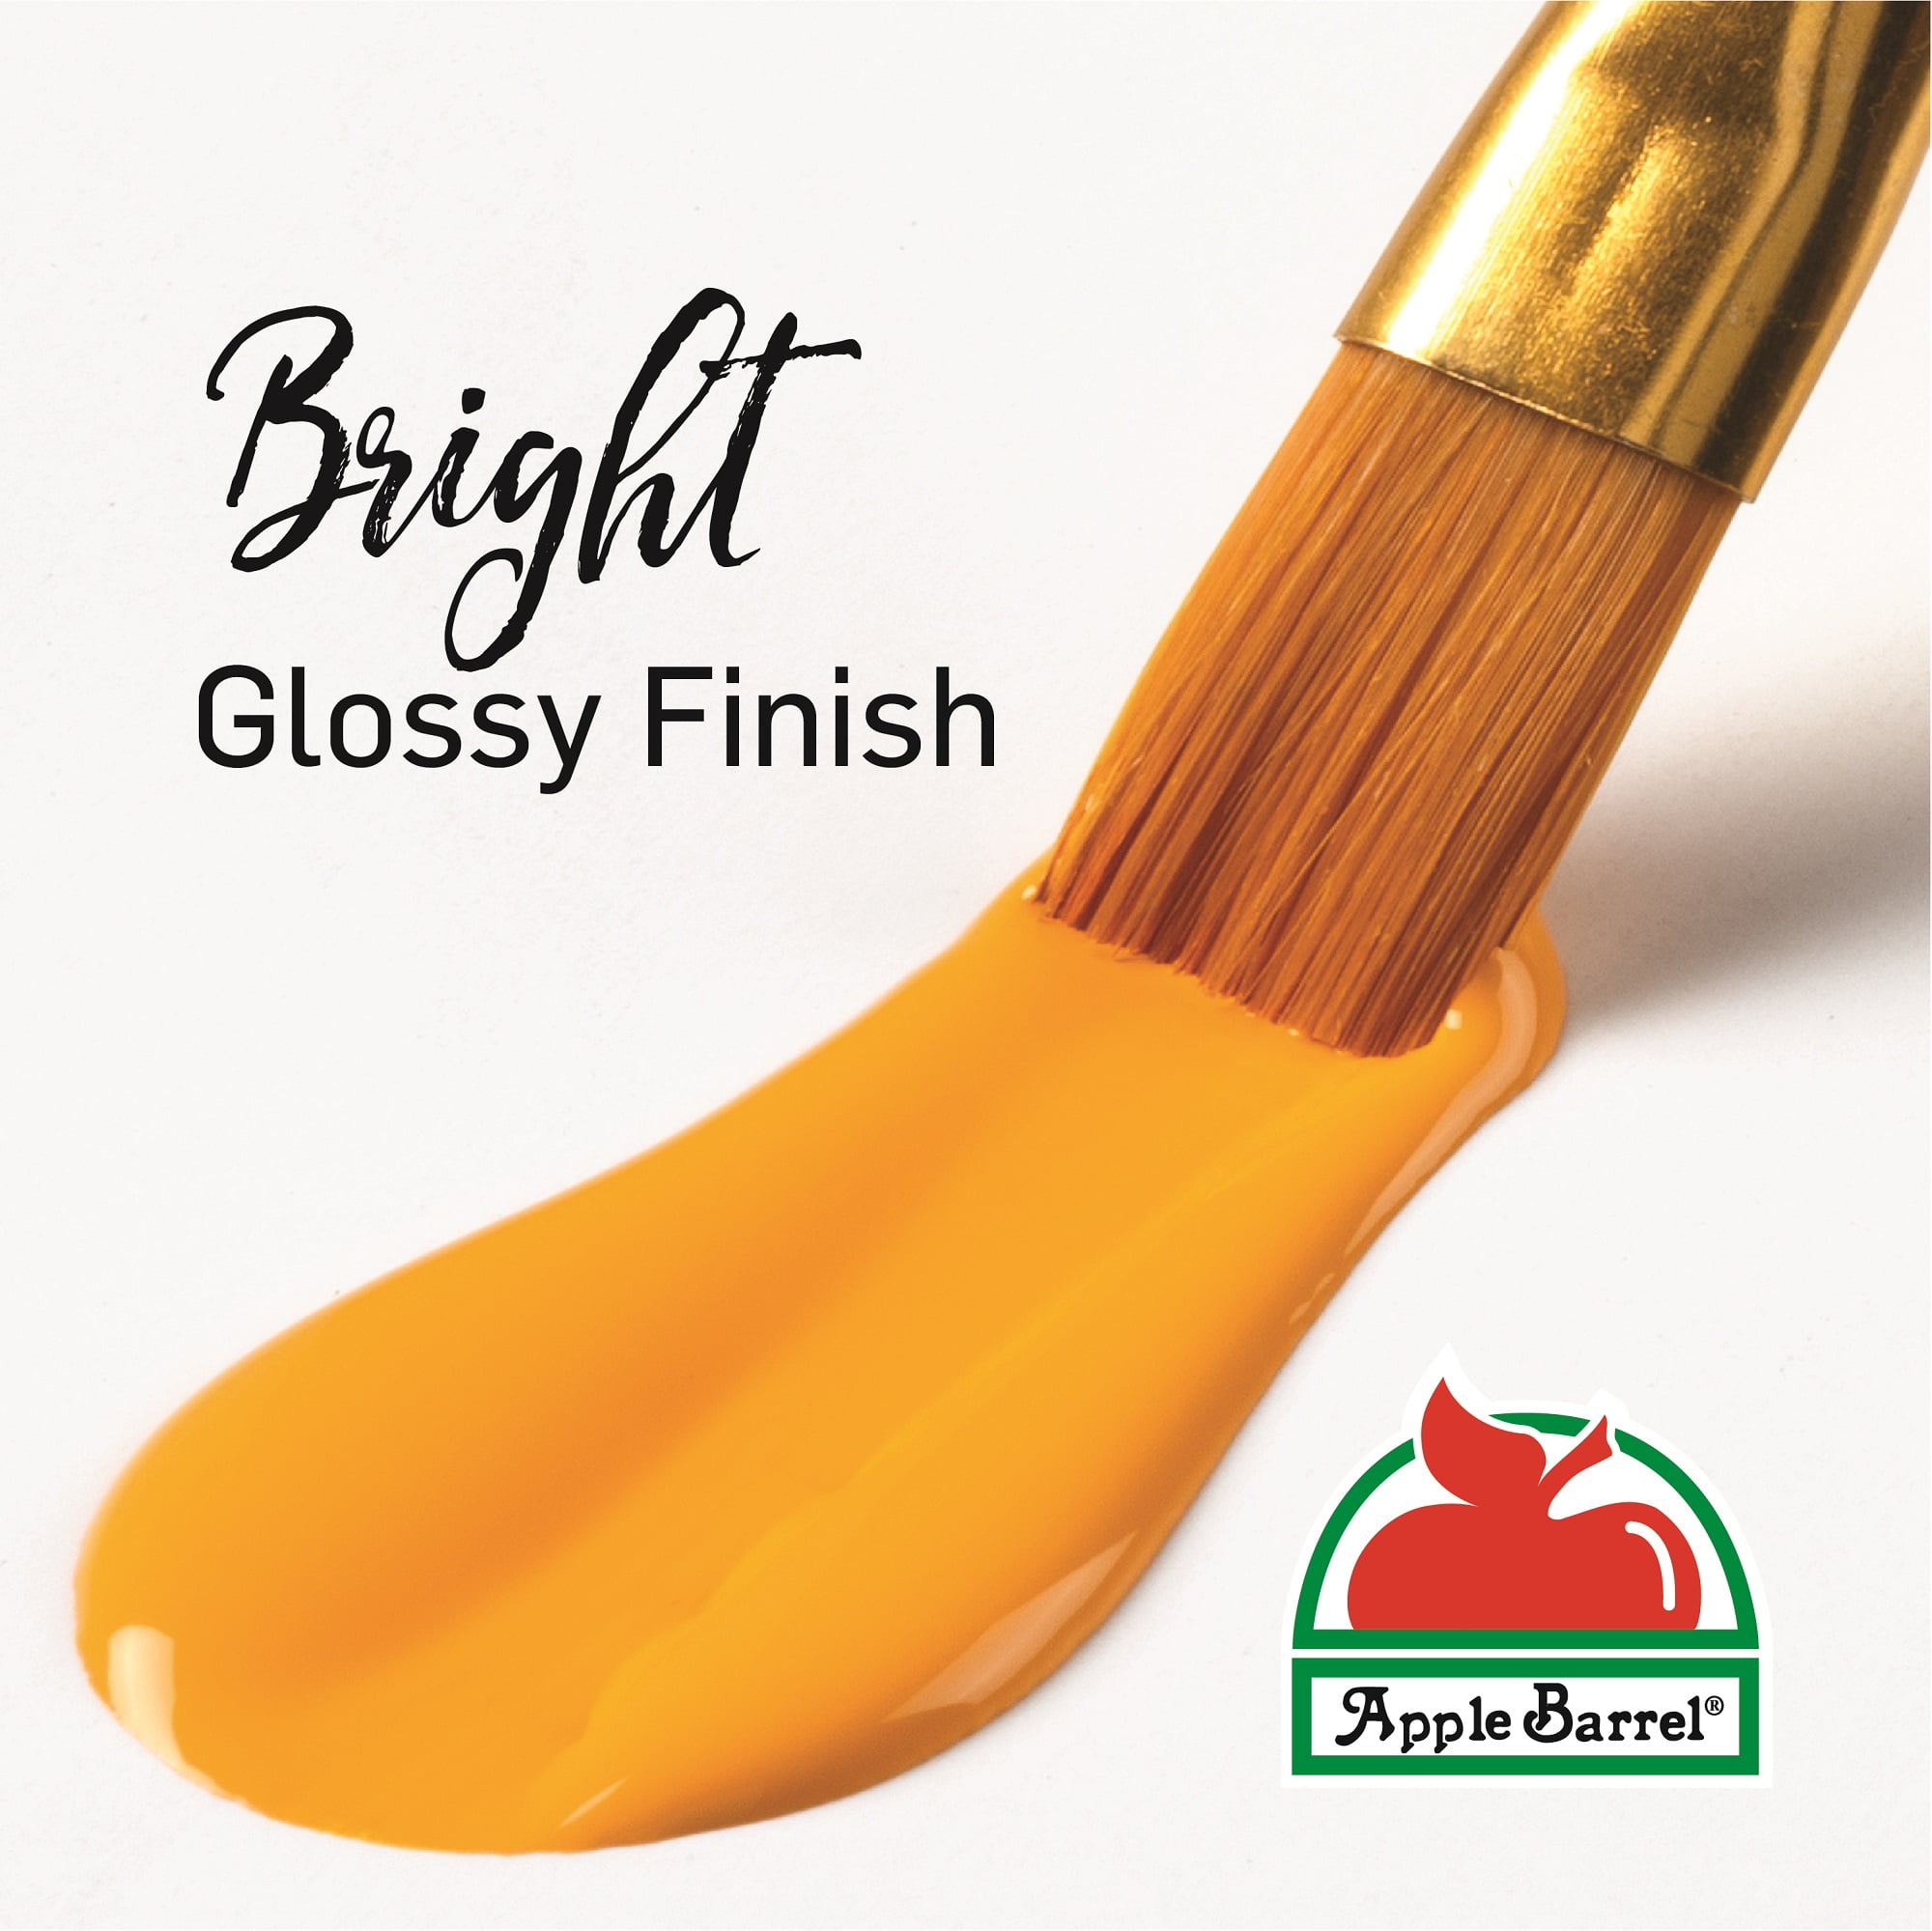 Apple Barrel Gloss Acrylic Paint in Assorted Colors (2-Ounce), 20621 White  - Helia Beer Co